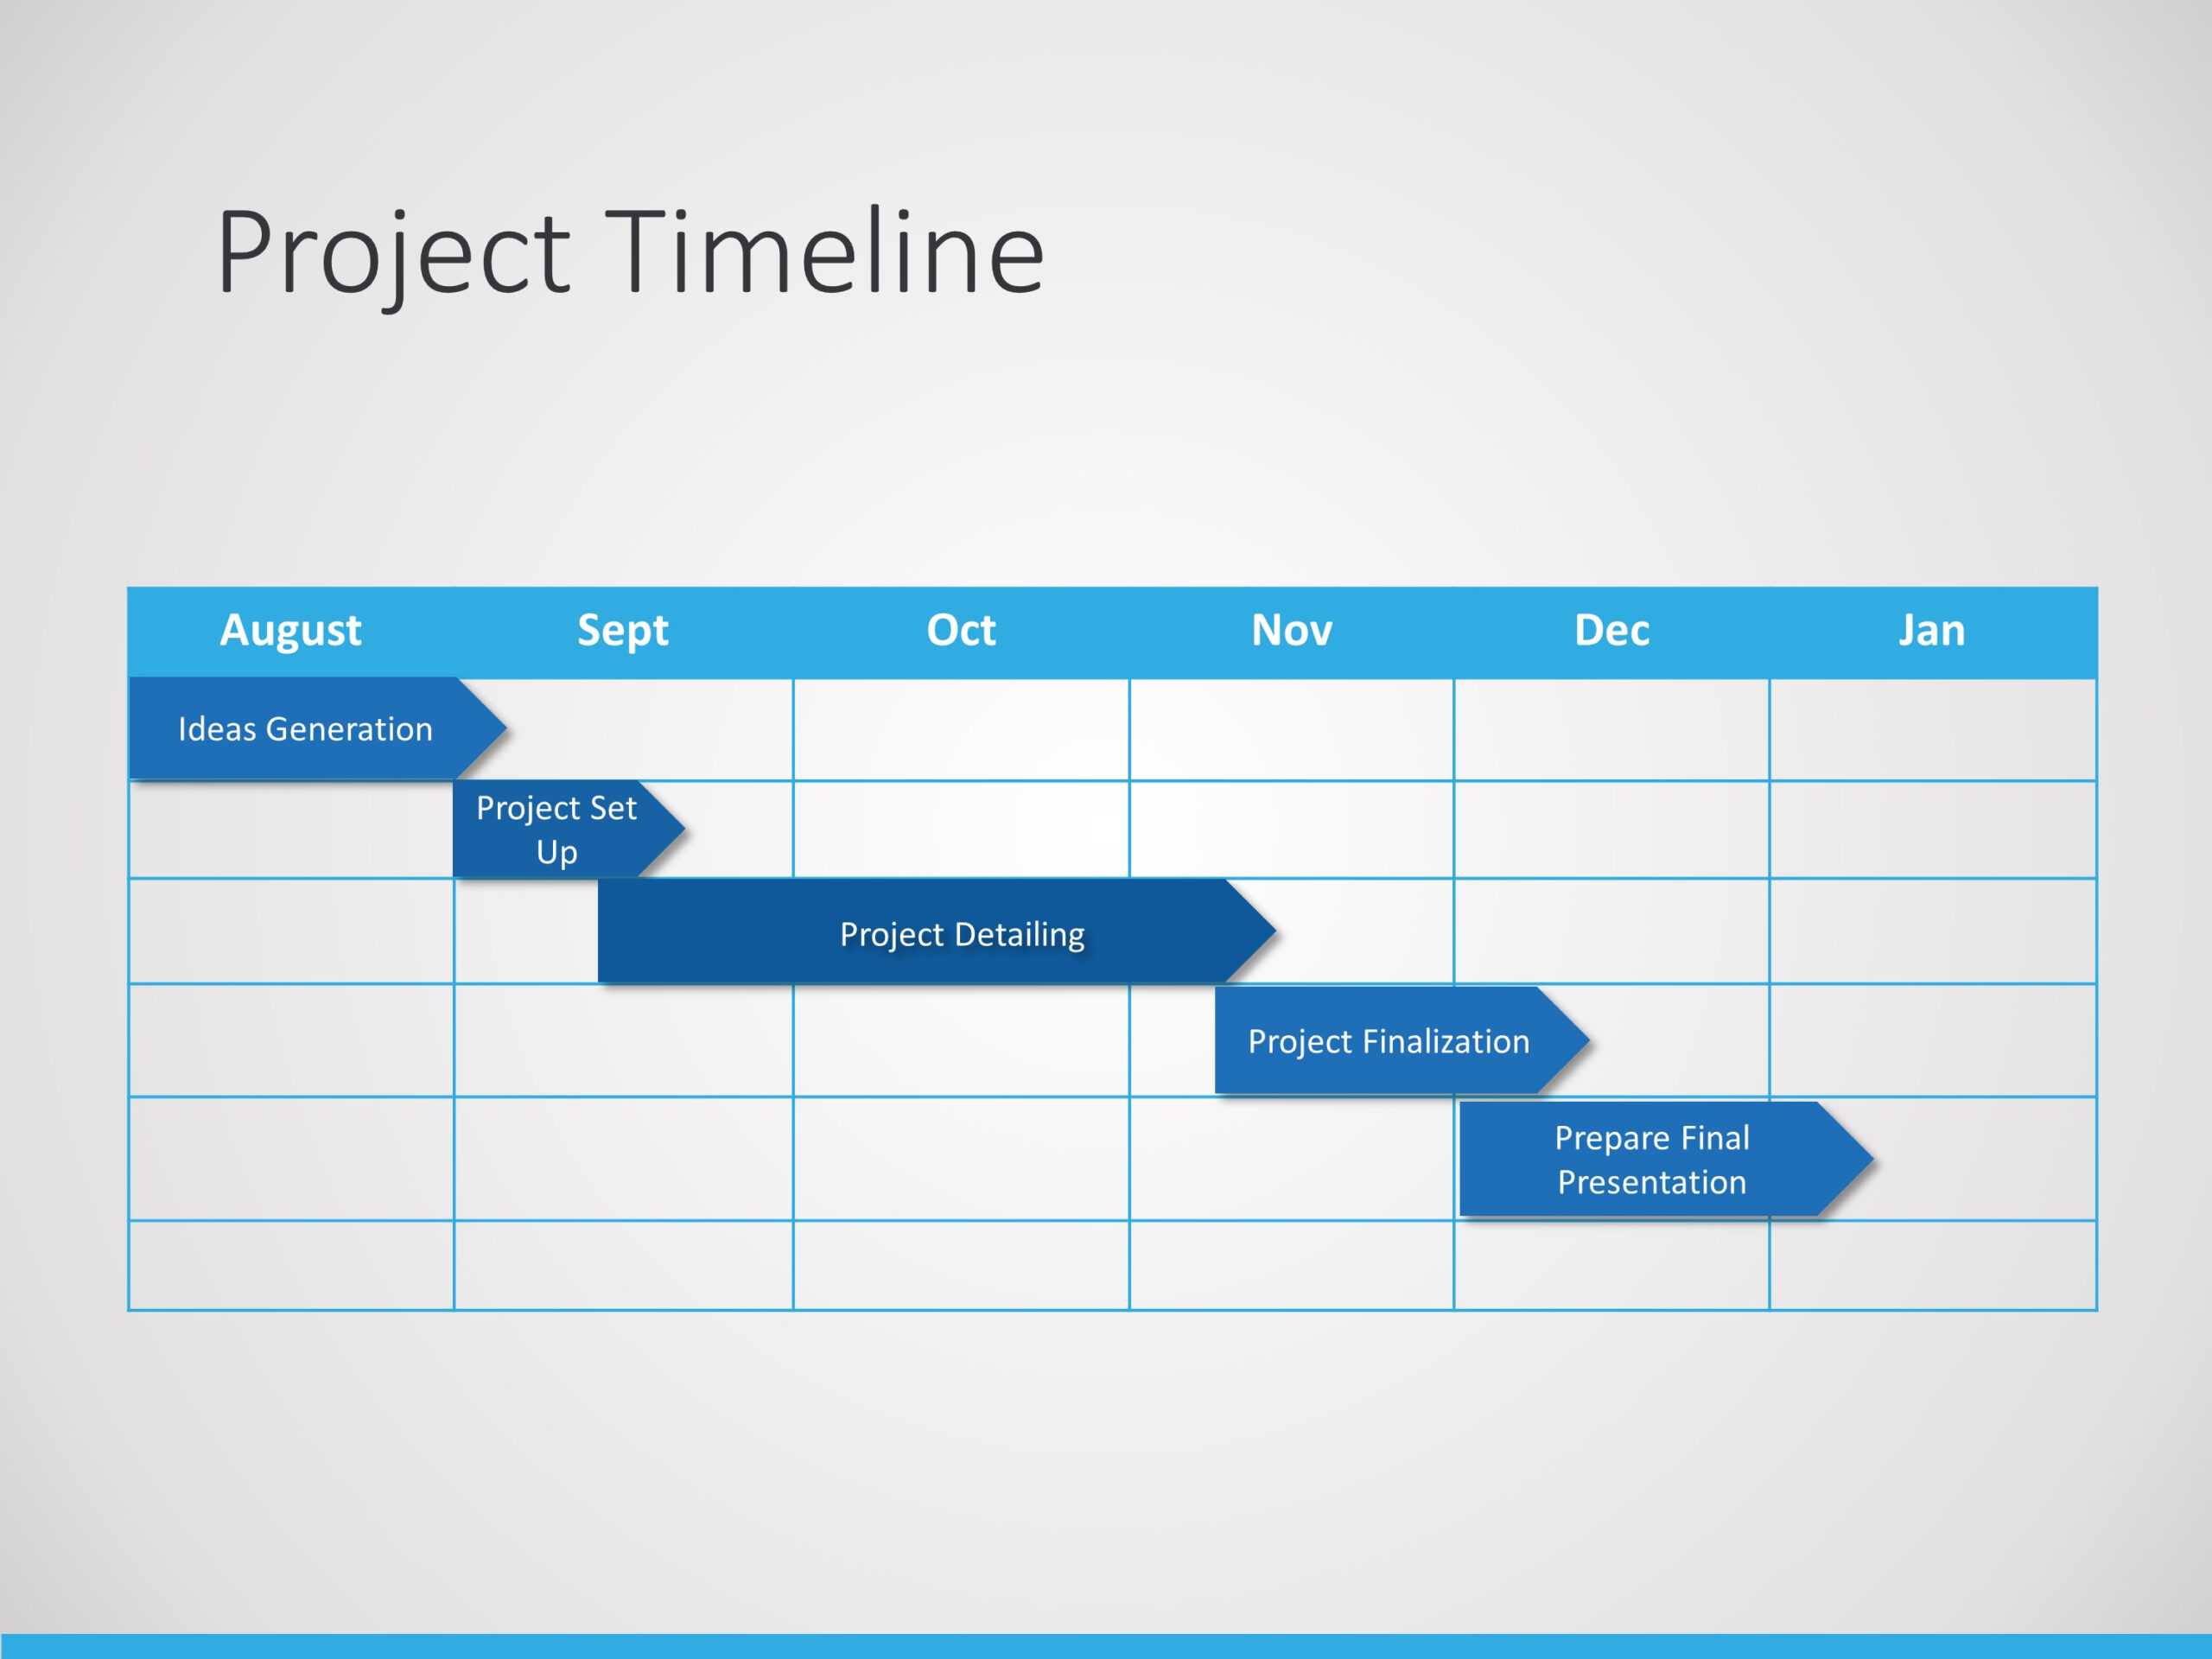 Project Timeline Powerpoint Template 2 | Project Planning With Regard To Project Schedule Template Powerpoint